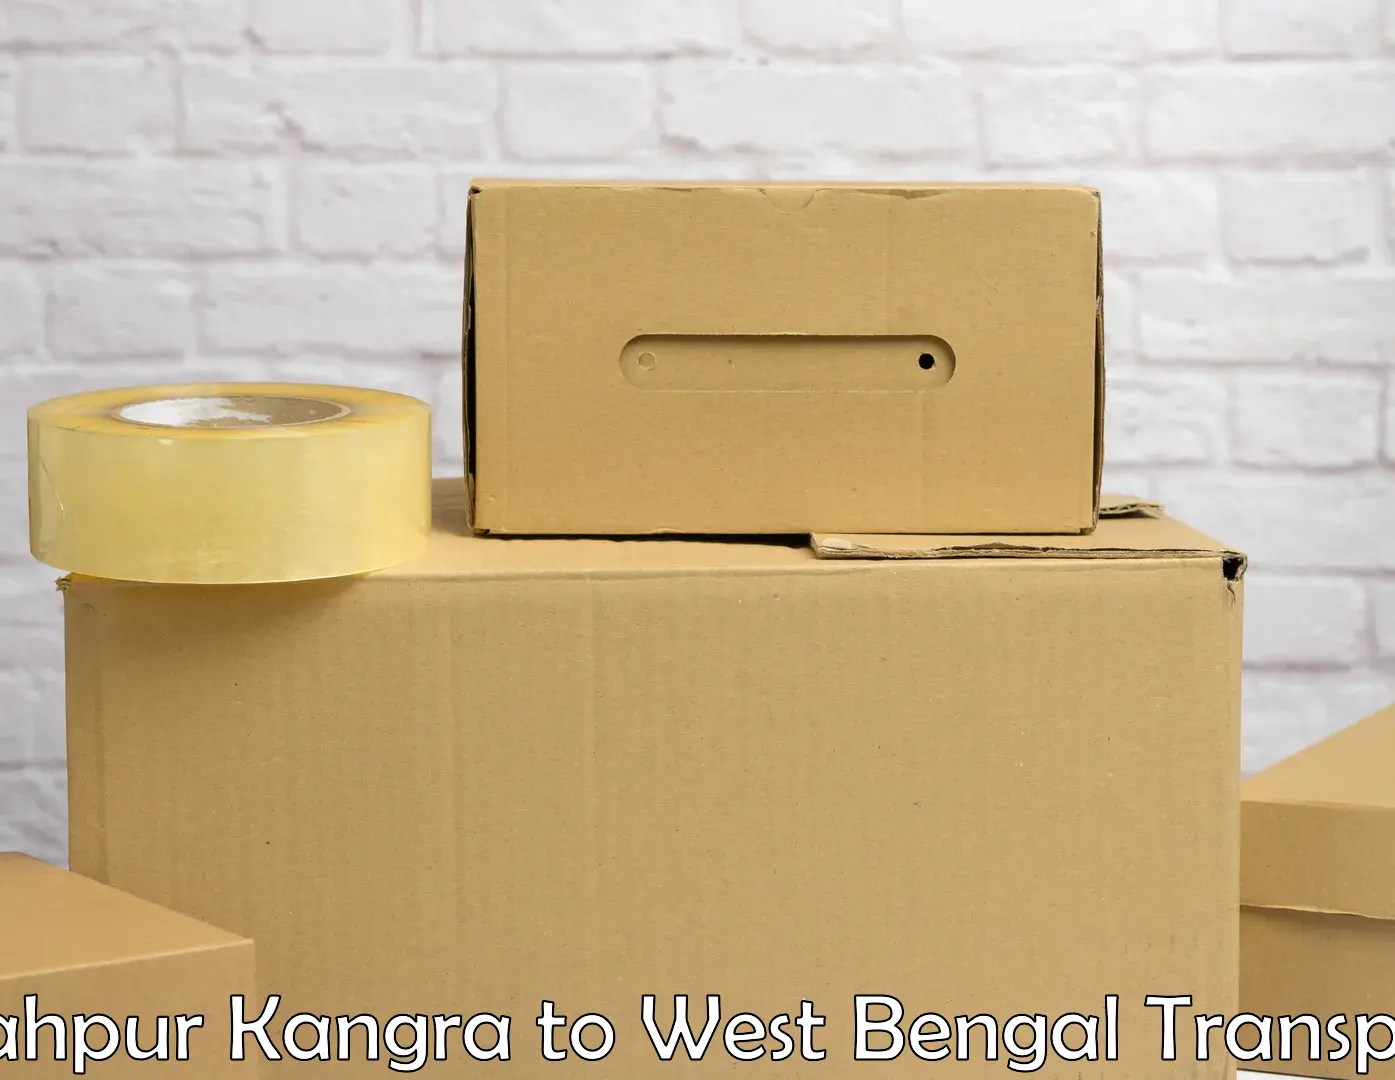 Truck transport companies in India in Shahpur Kangra to West Bengal